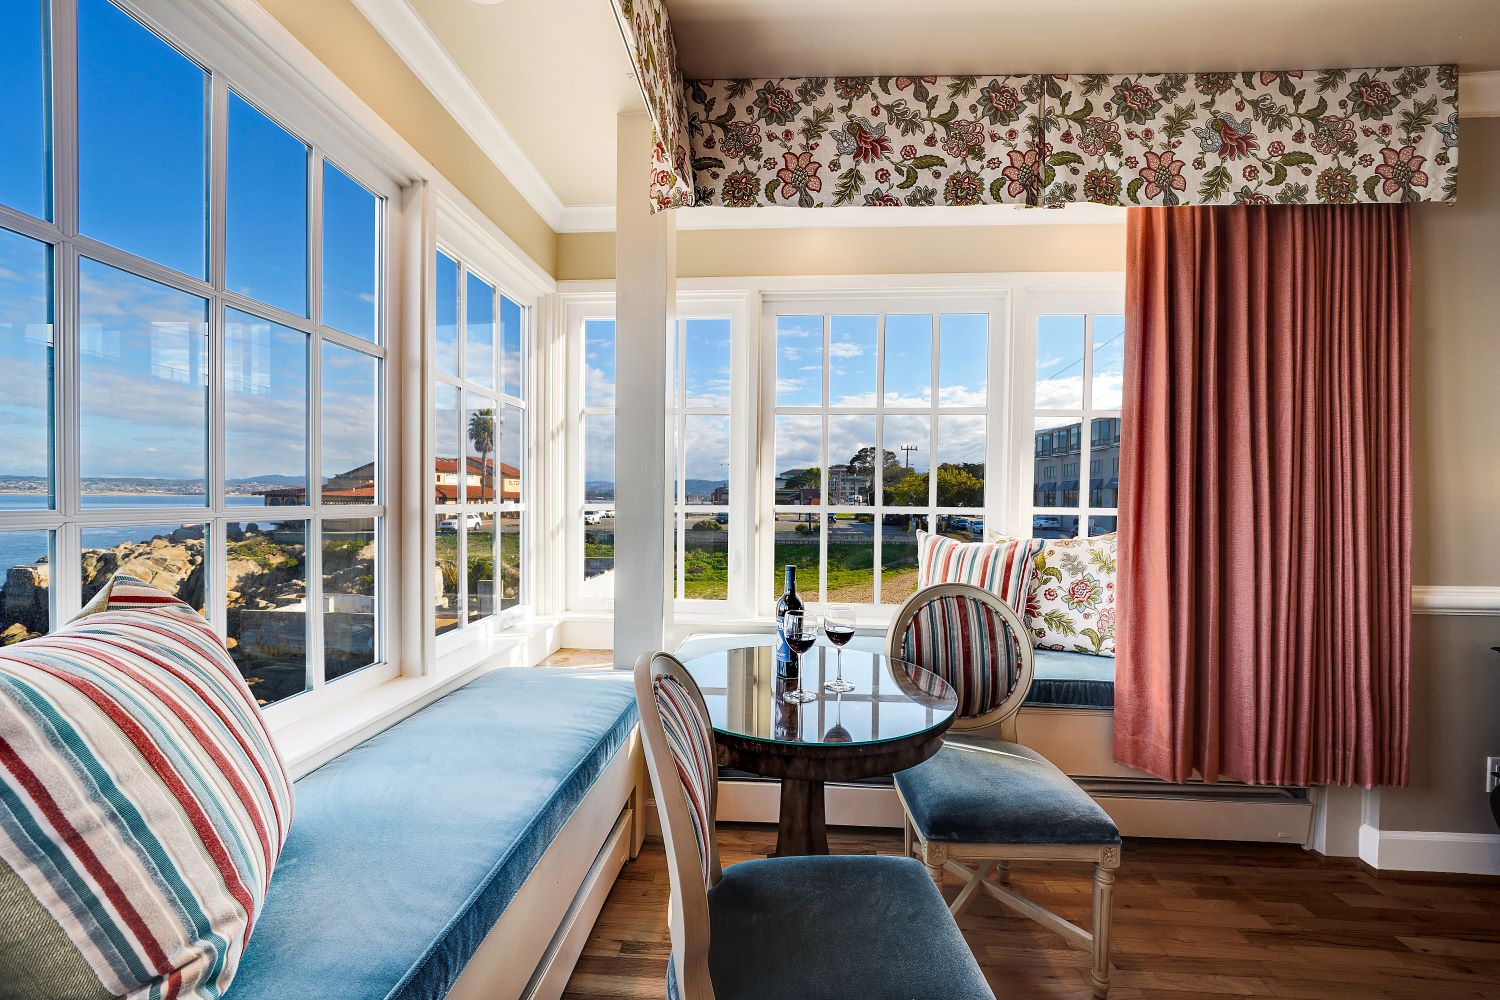 Spindrift Inn Named Best Luxury Honeymoon Boutique Hotel in California by Luxury Lifestyle Awards